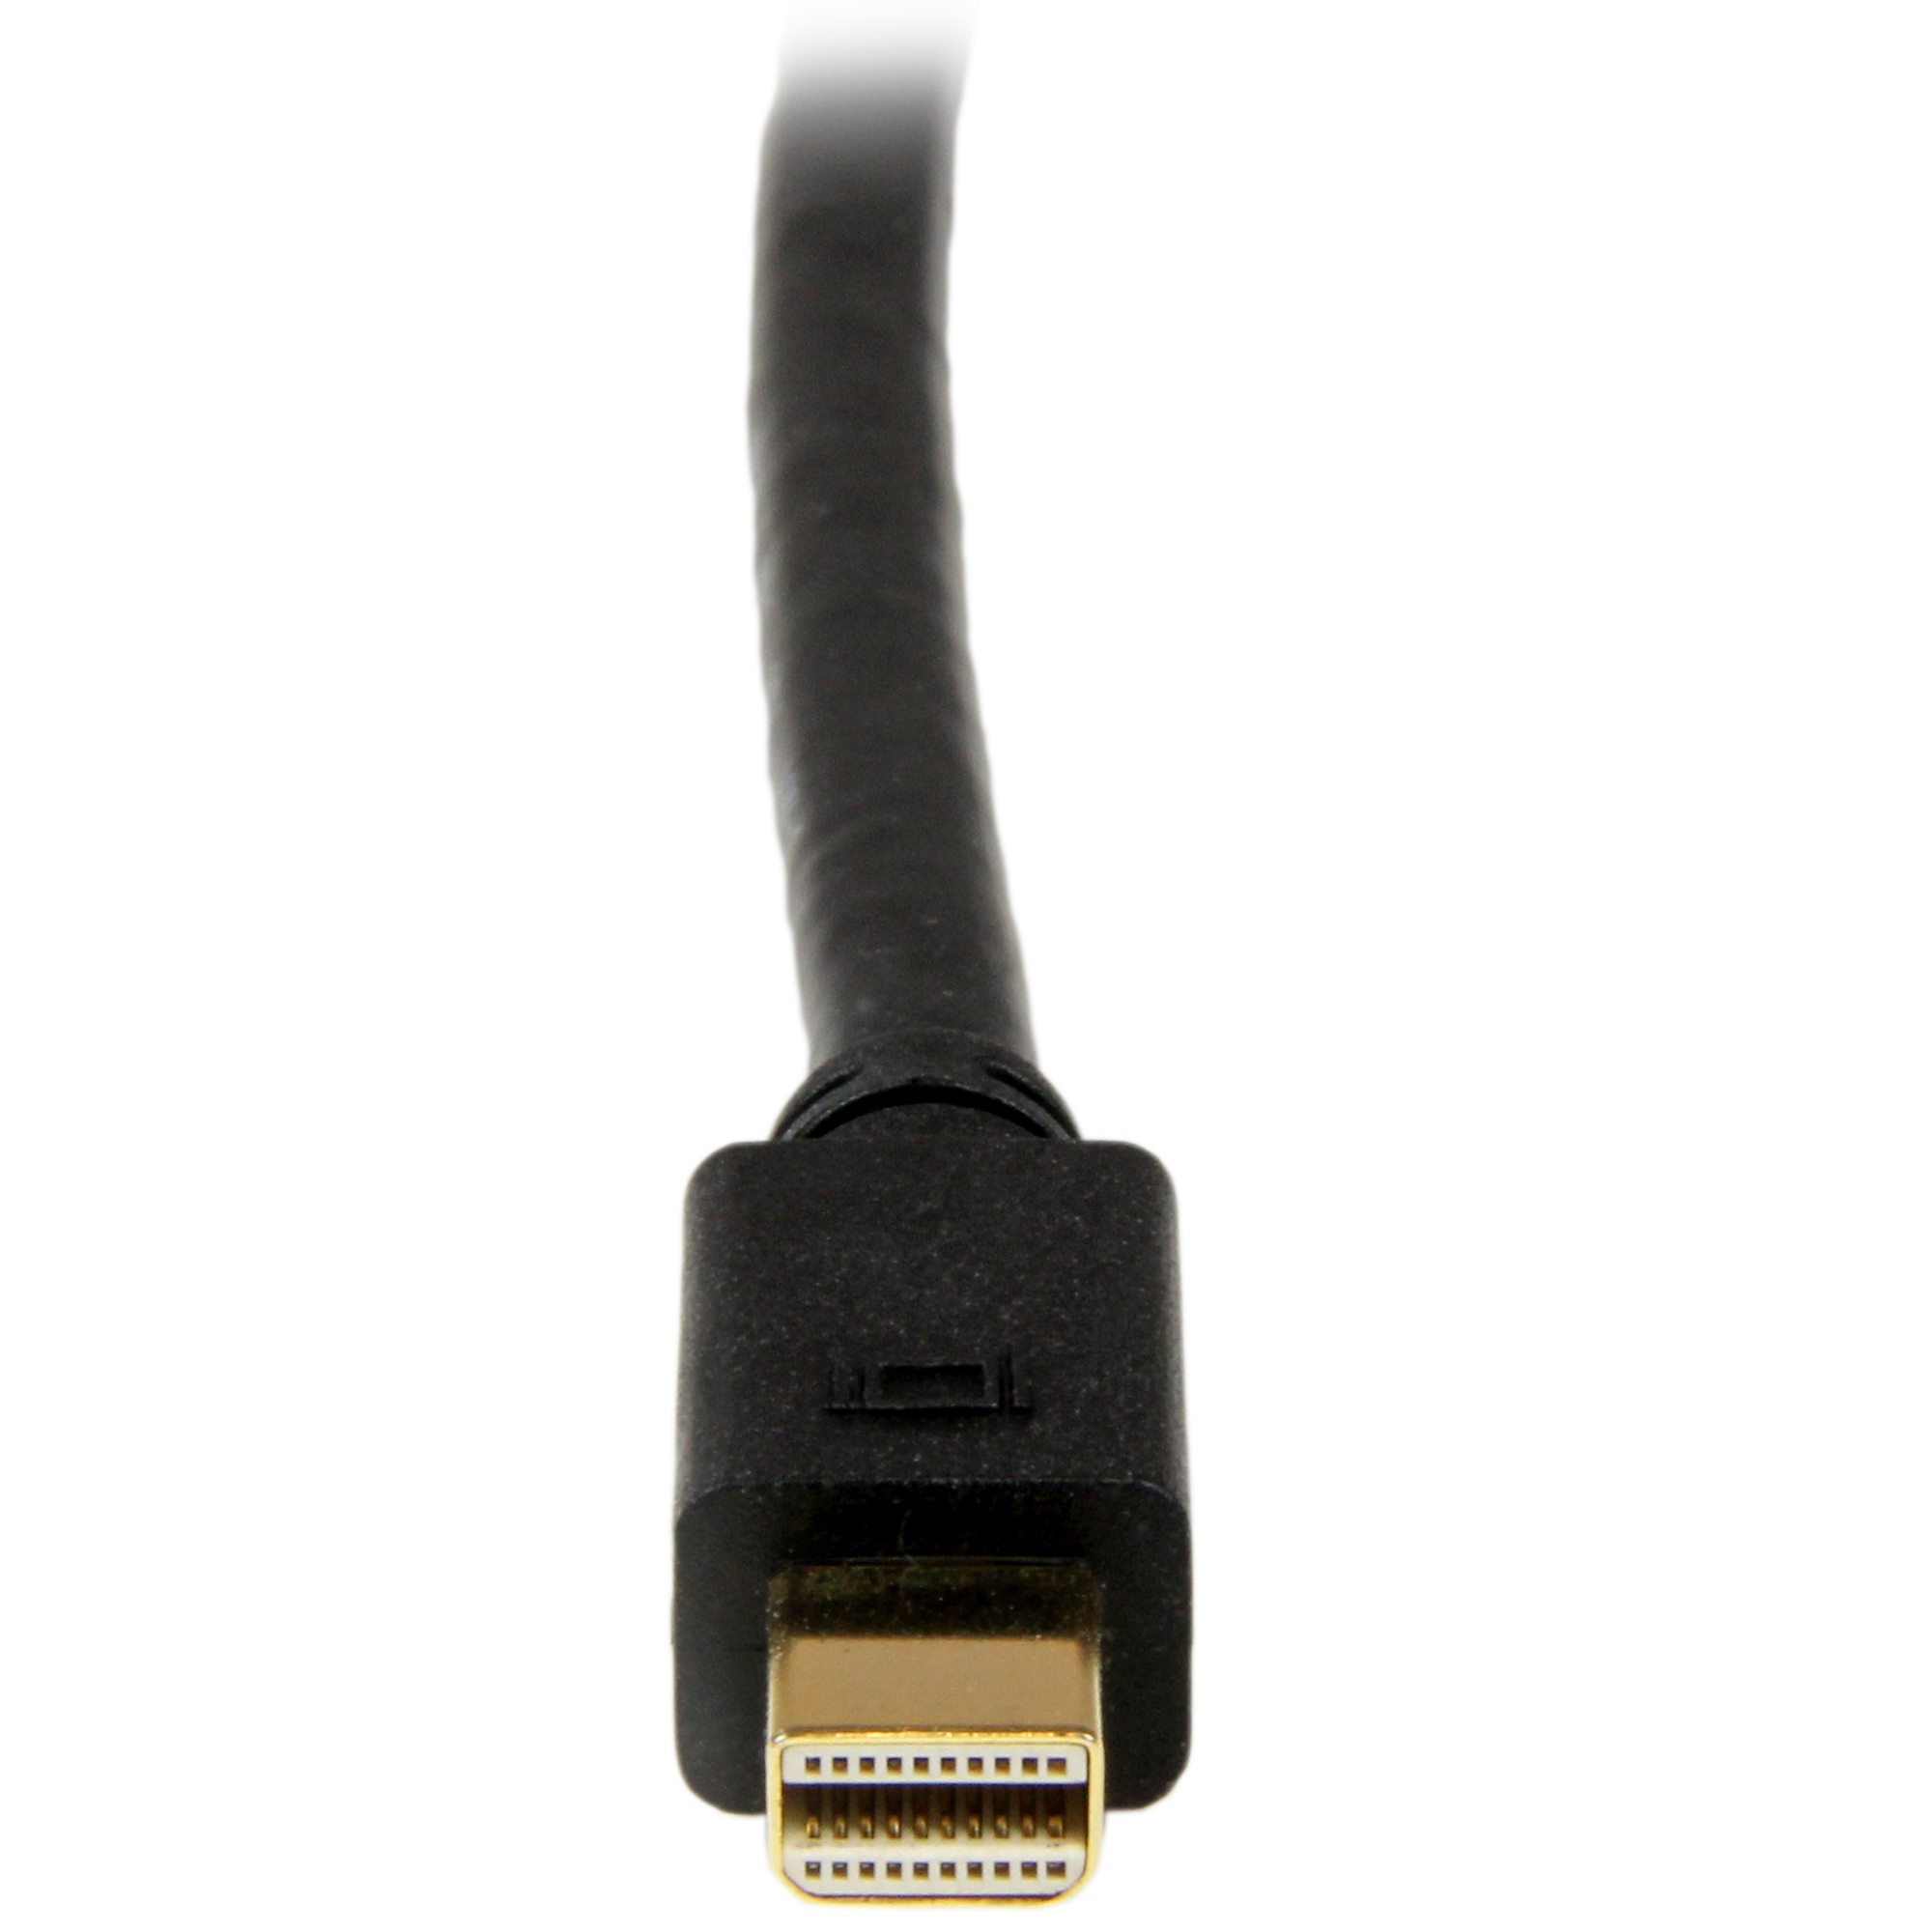 StarTech.com 3ft (1m) Mini DisplayPort to HDMI Cable - 4K 30Hz Video - mDP  to HDMI Adapter Cable - Mini DP or Thunderbolt 1/2 Mac/PC to HDMI